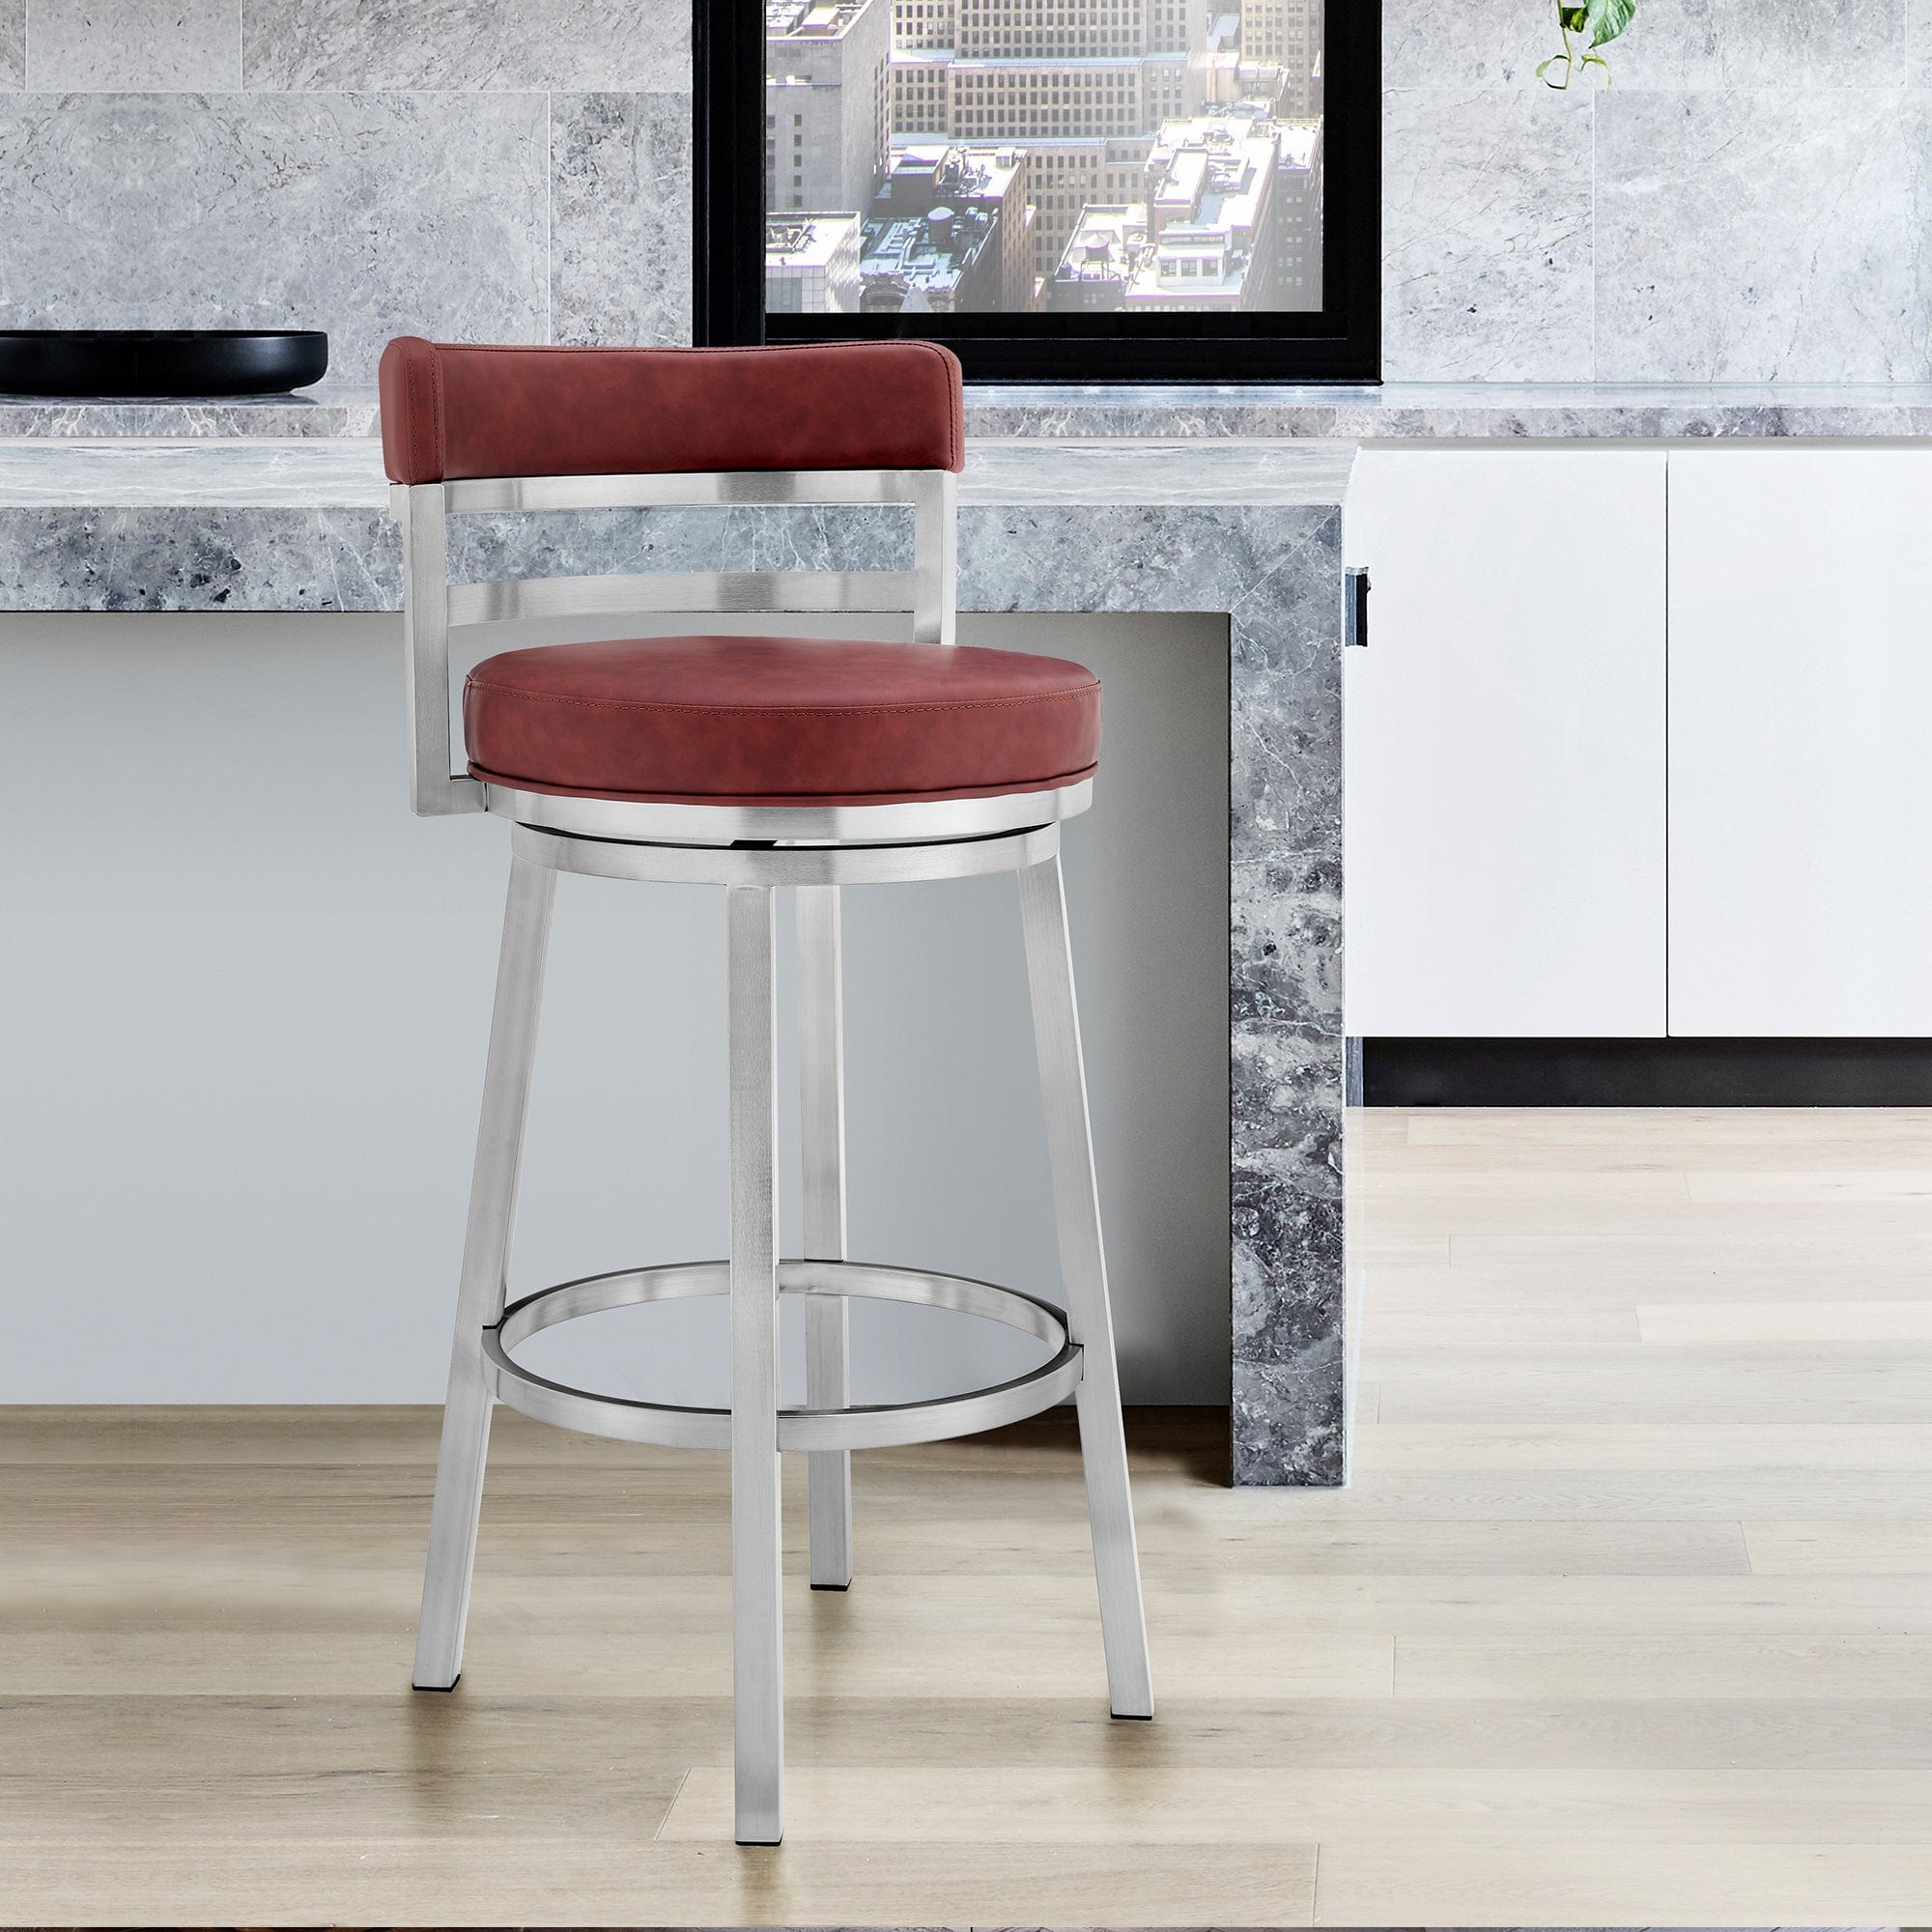 Armen Living Barstool Armen Living | Madrid 30" Bar Height Swivel Red Faux Leather and Brushed Stainless Steel Bar Stool | LCMABABSRED30